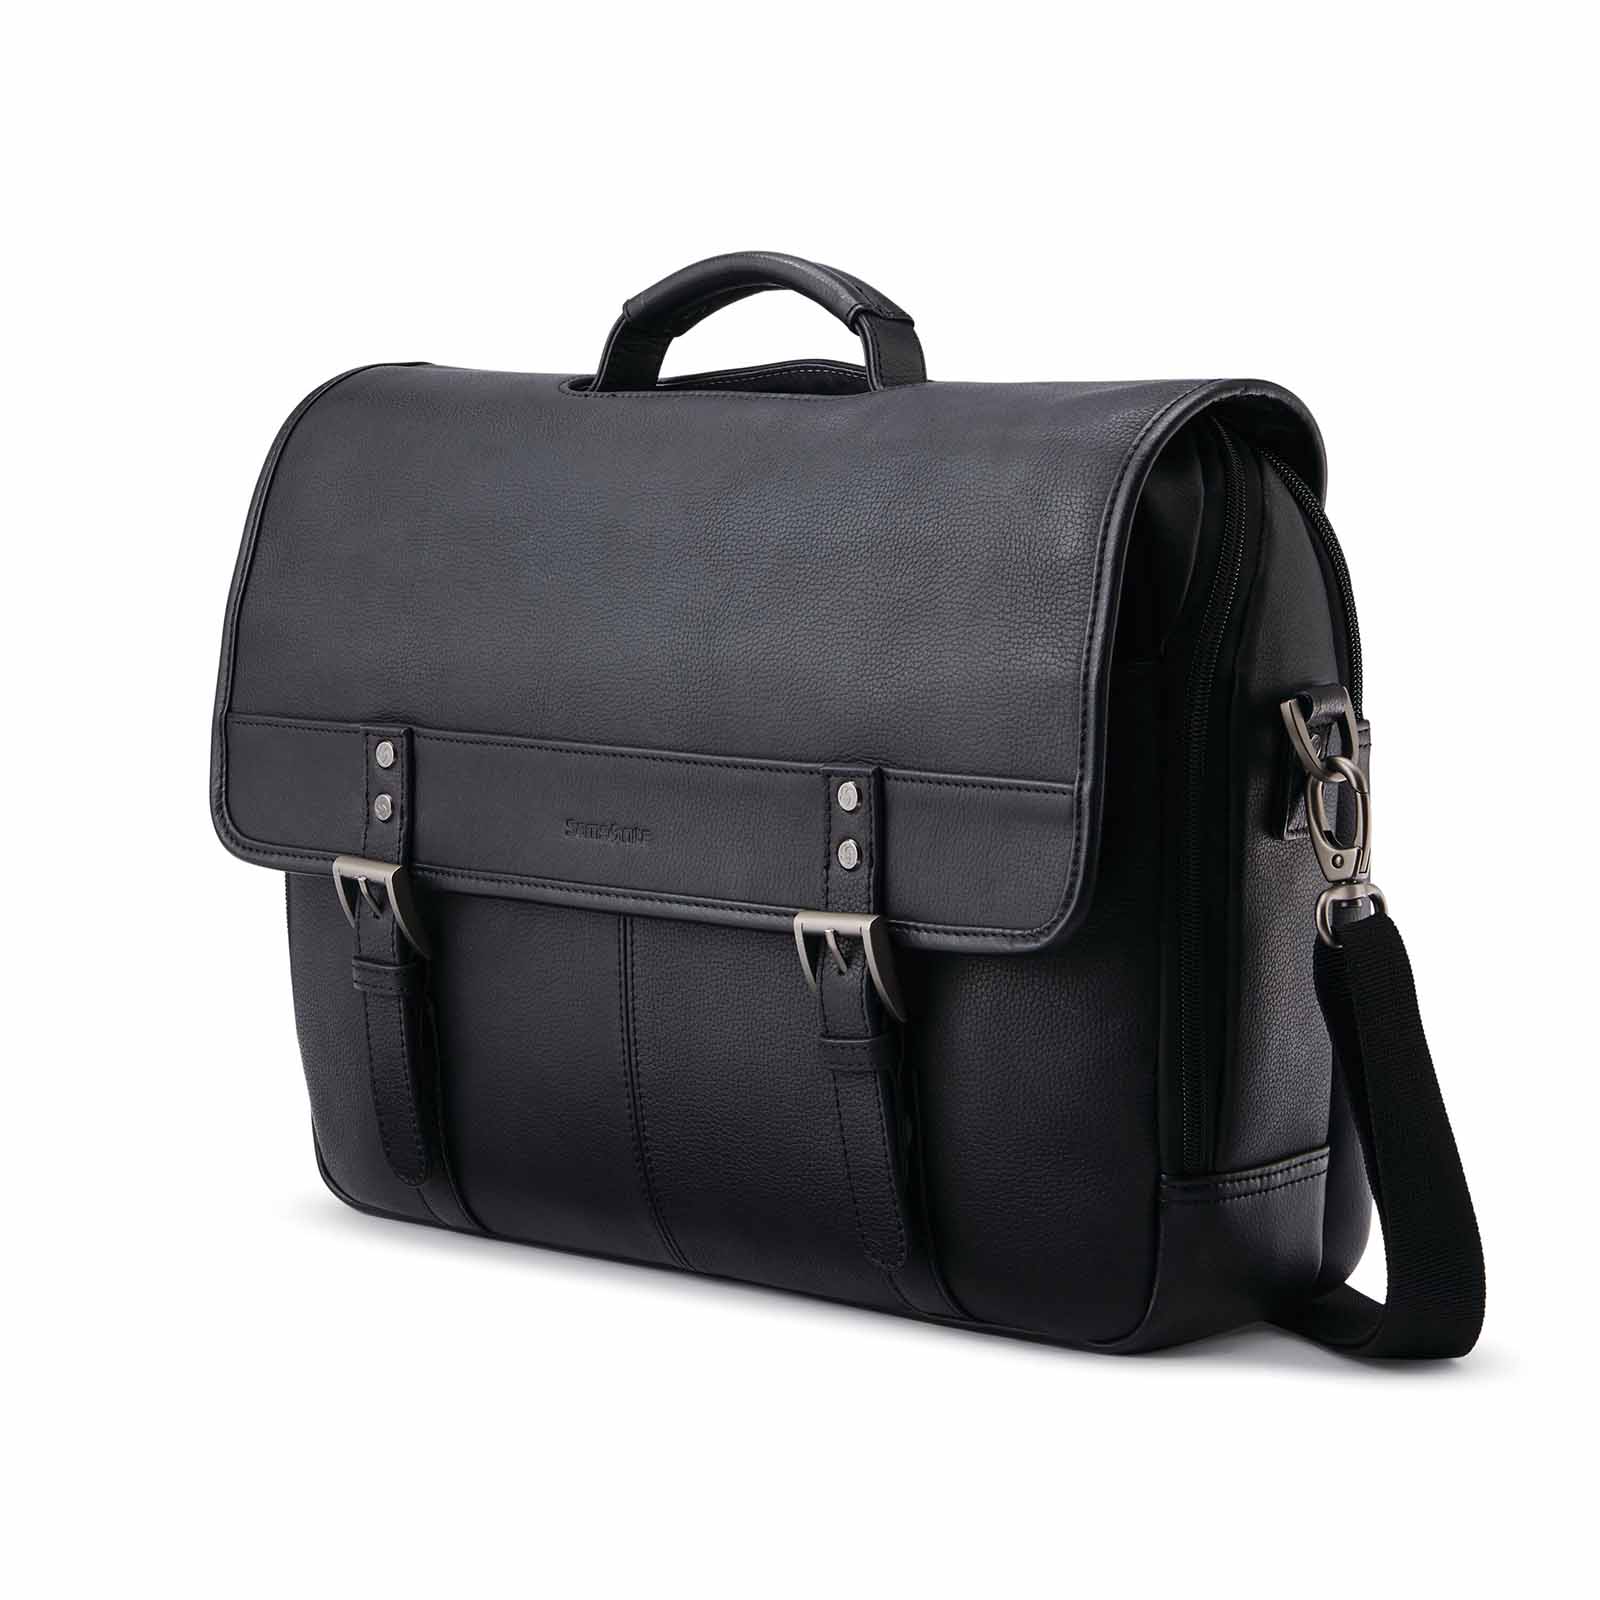 Samsonite-Classic-Leather-15-Inch-Flapover-Black-Front-Angle